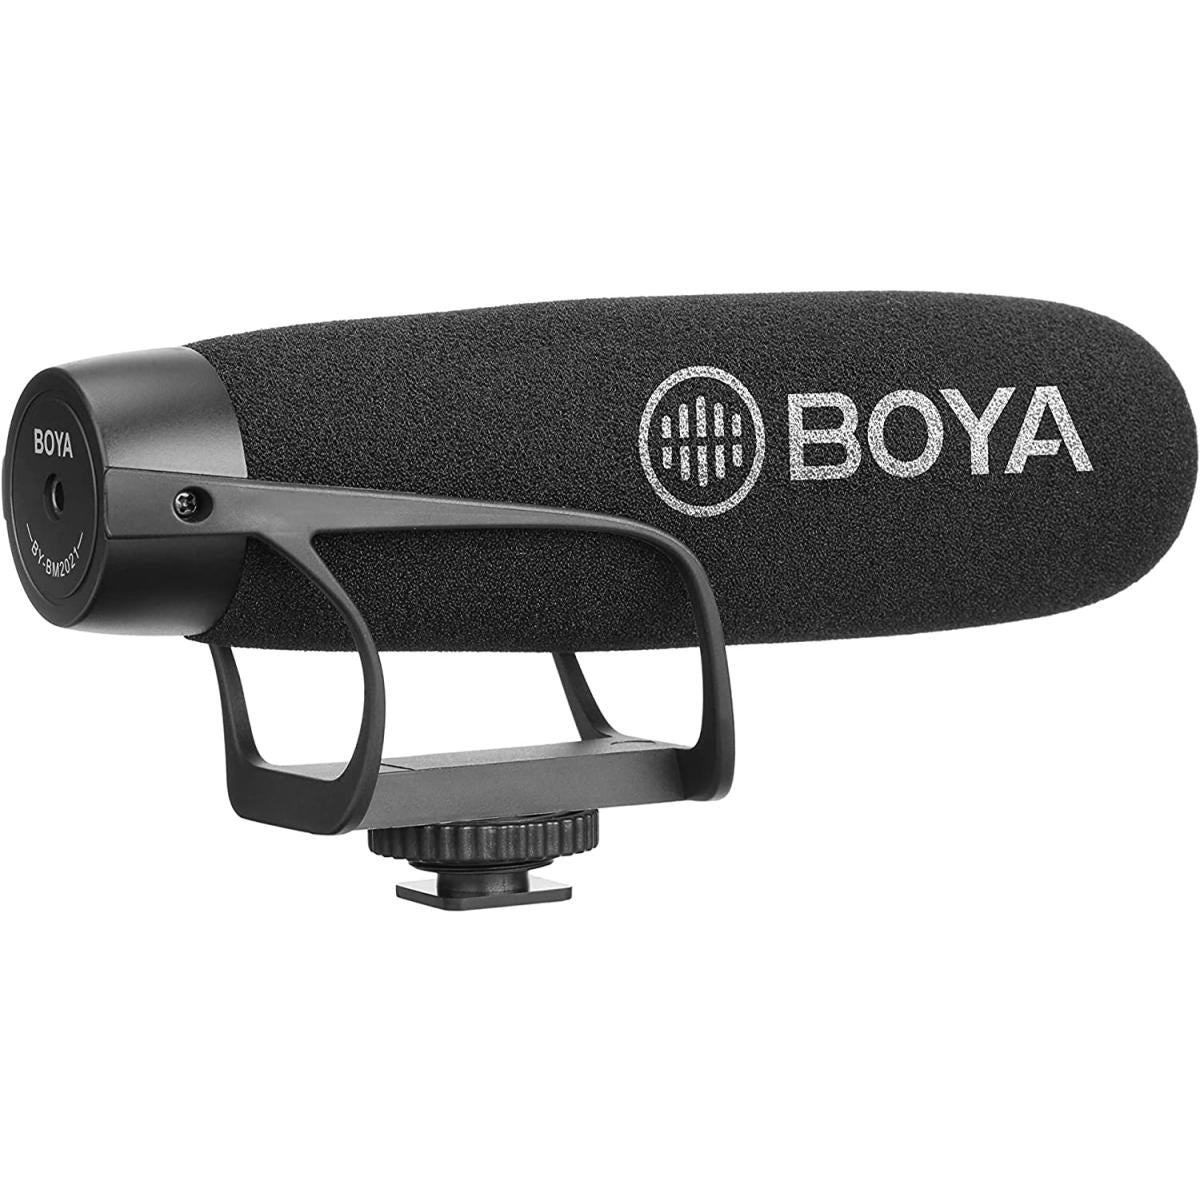 BOYA Wired On-Camera Super-Cardioid Shotgun Microphone for PC Laptops and Smartphone